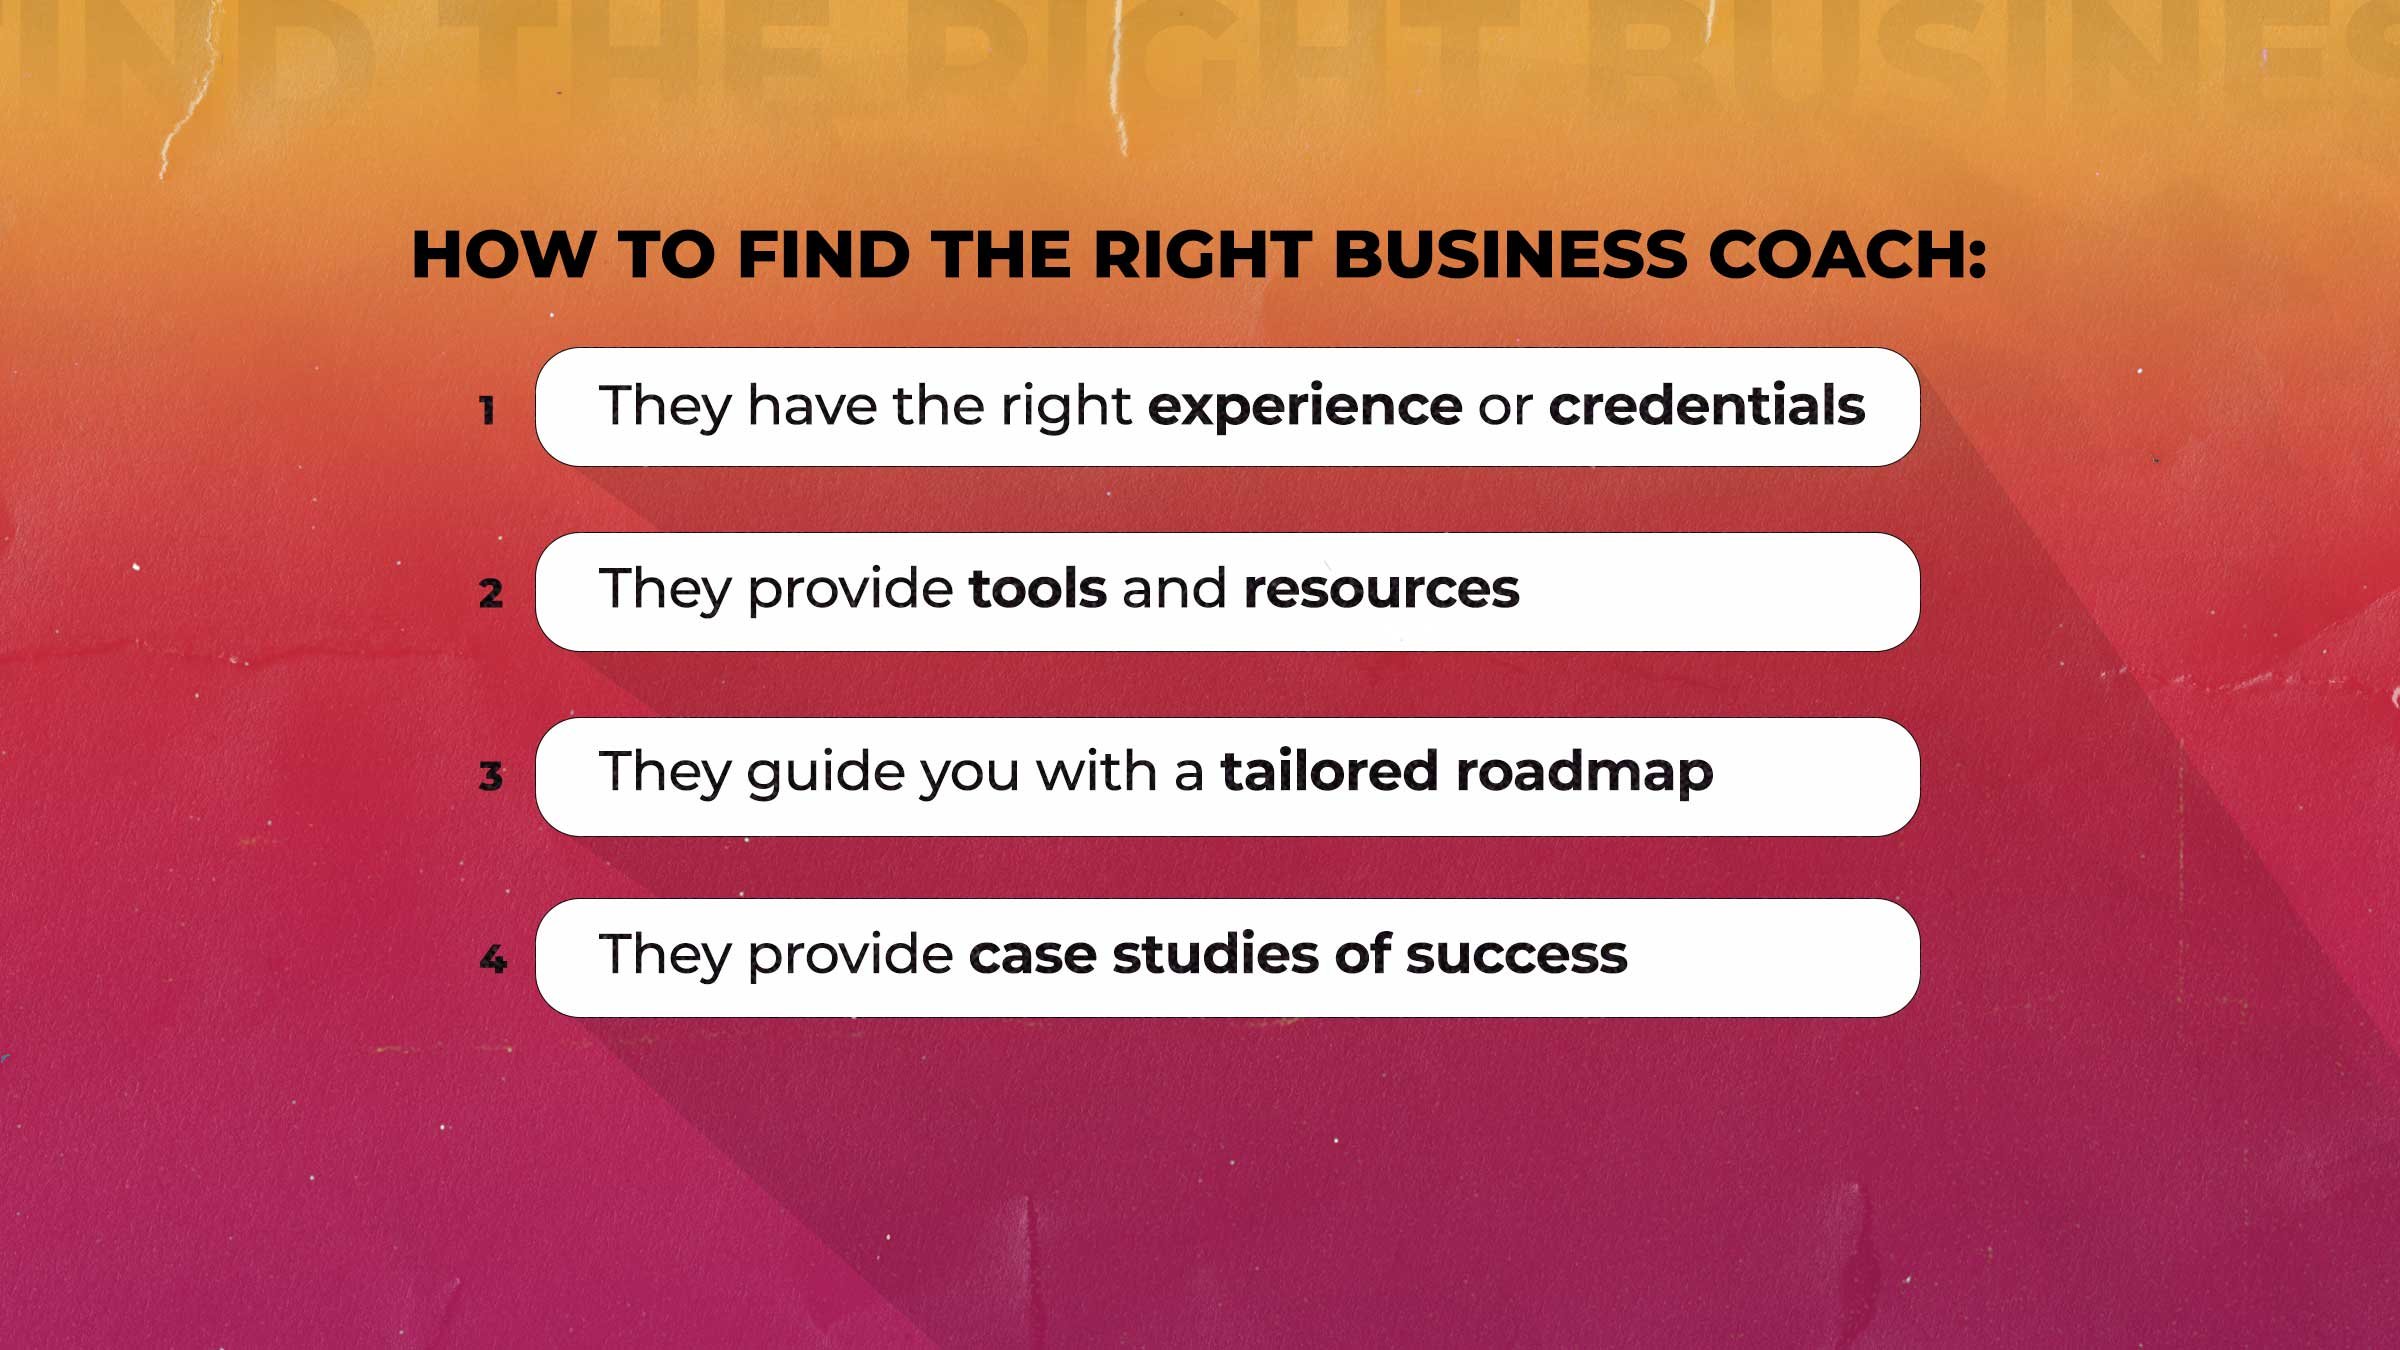 How to find the right business coach: An introduction | The Entourage